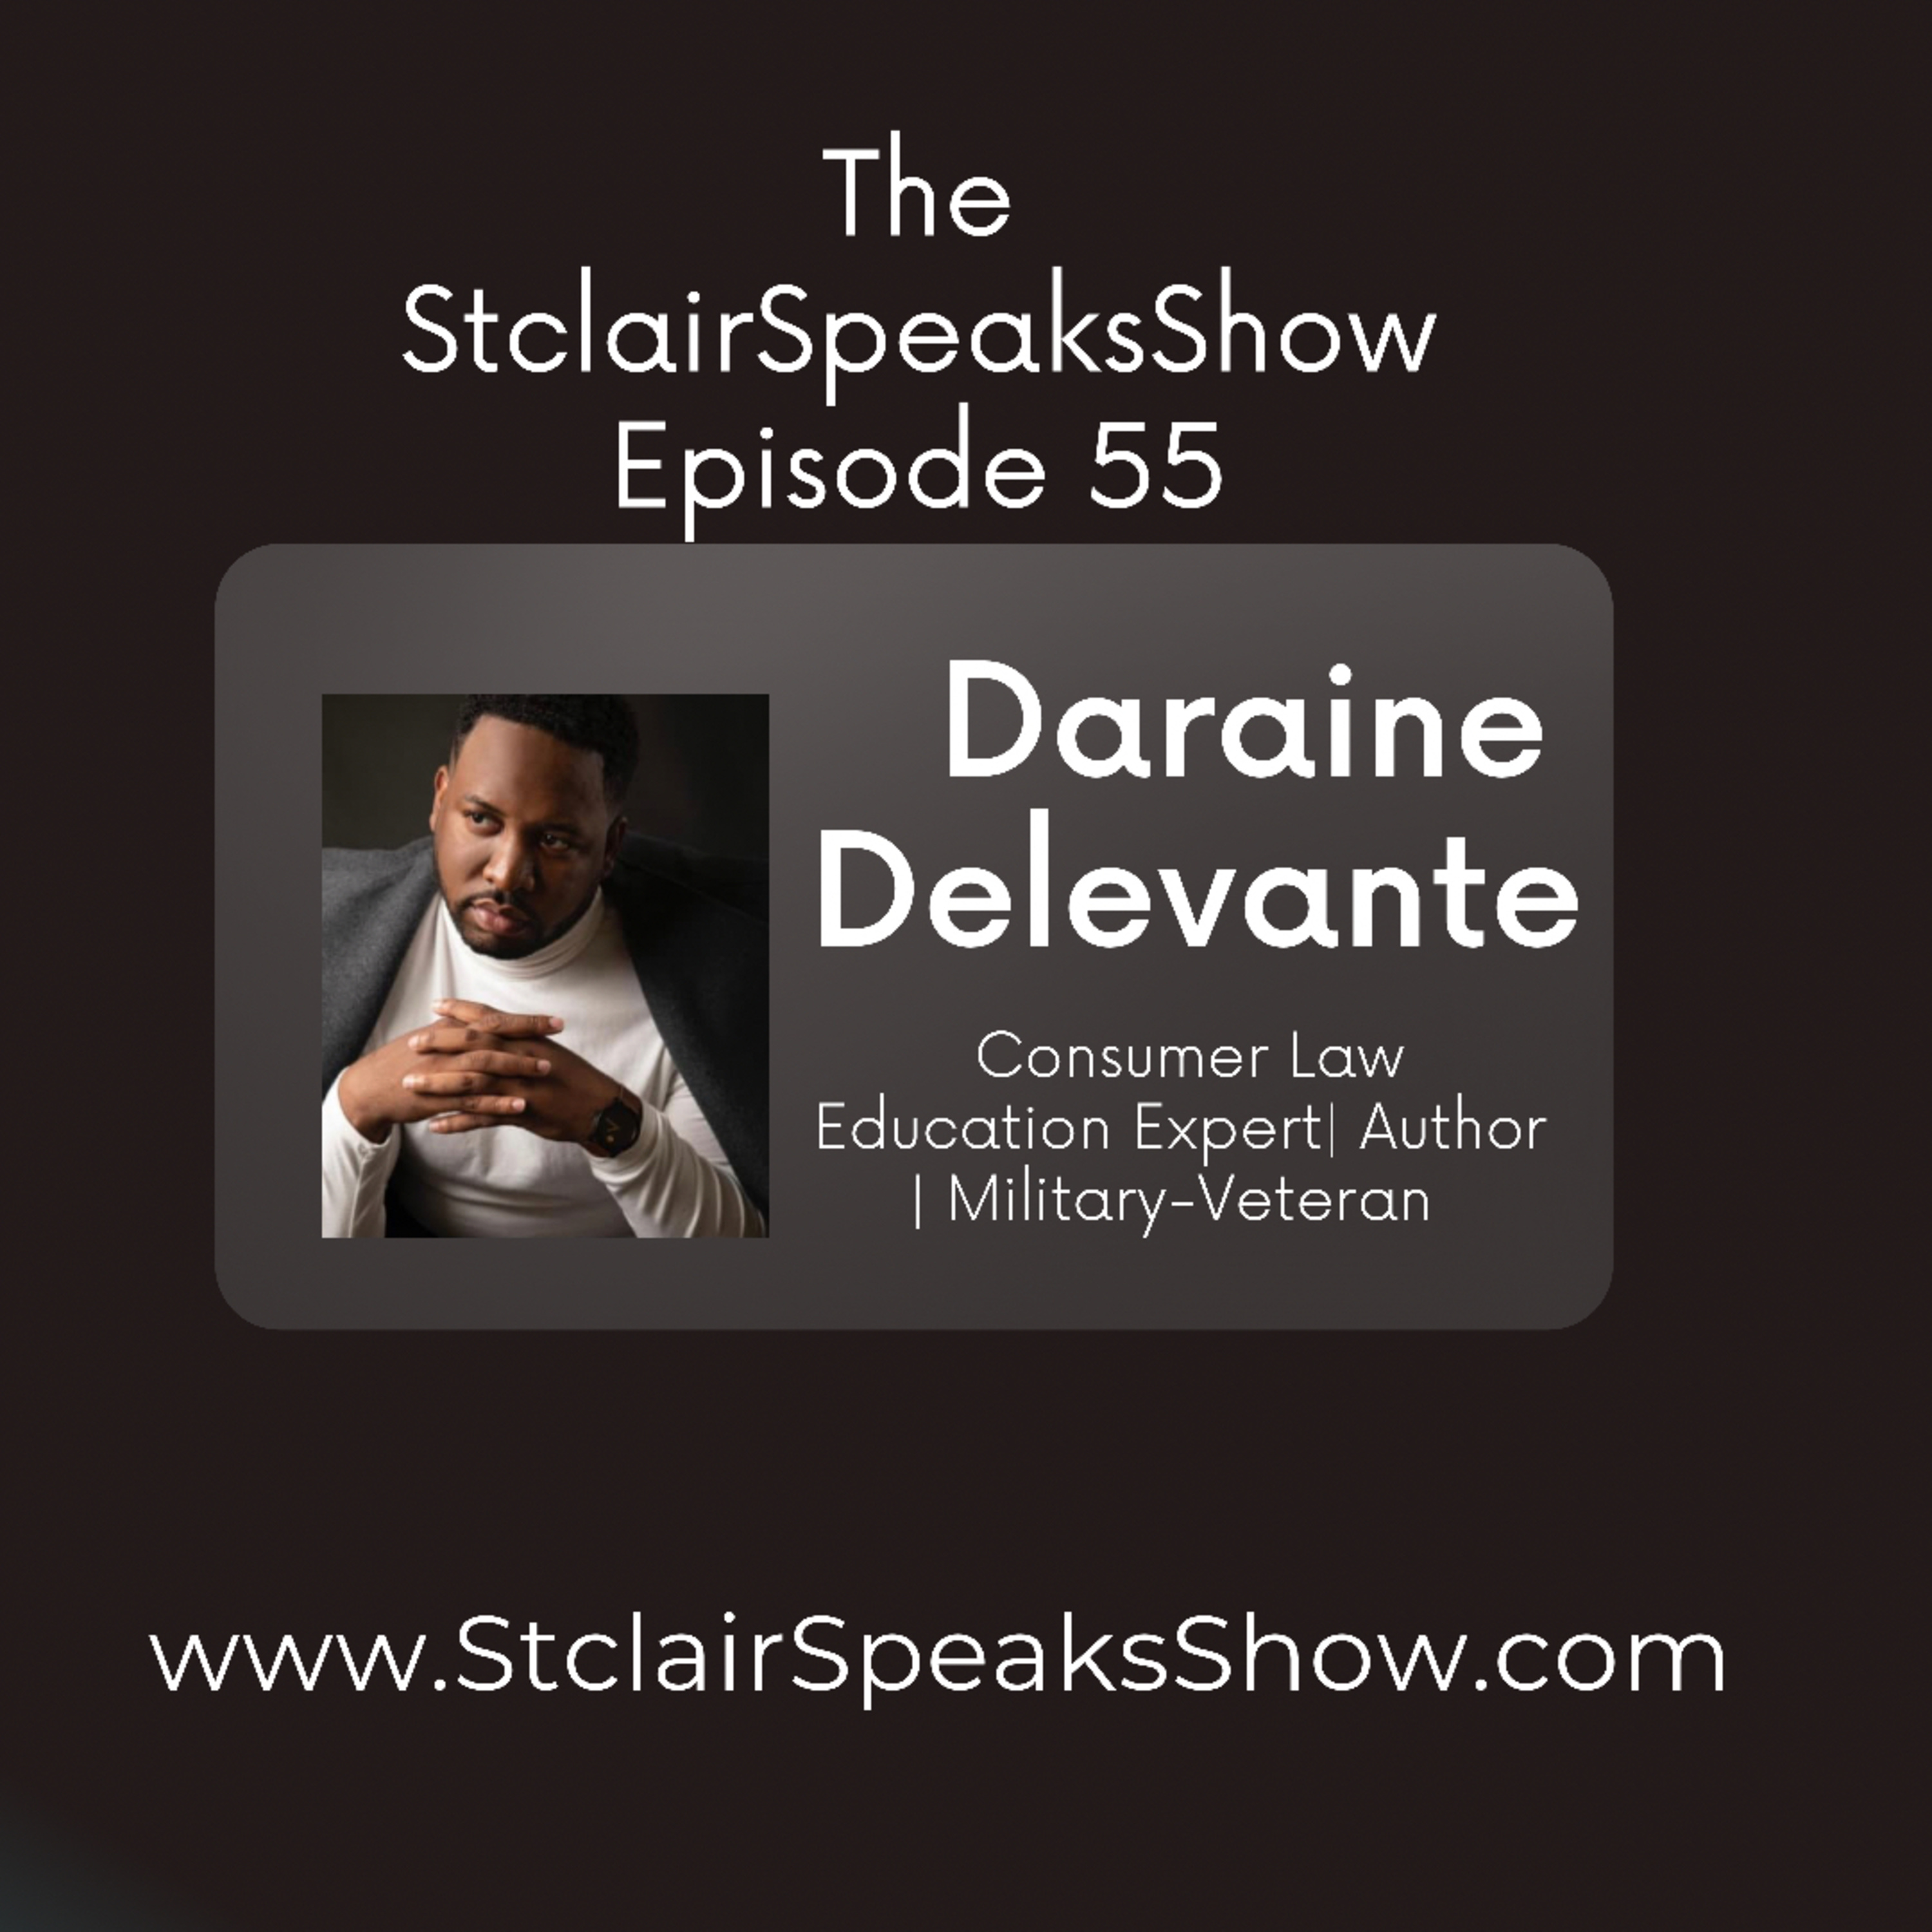 The StclairSpeaksShow featuring Daraine Delevante Consumer Law Education Expert| Author | Military-Veteran